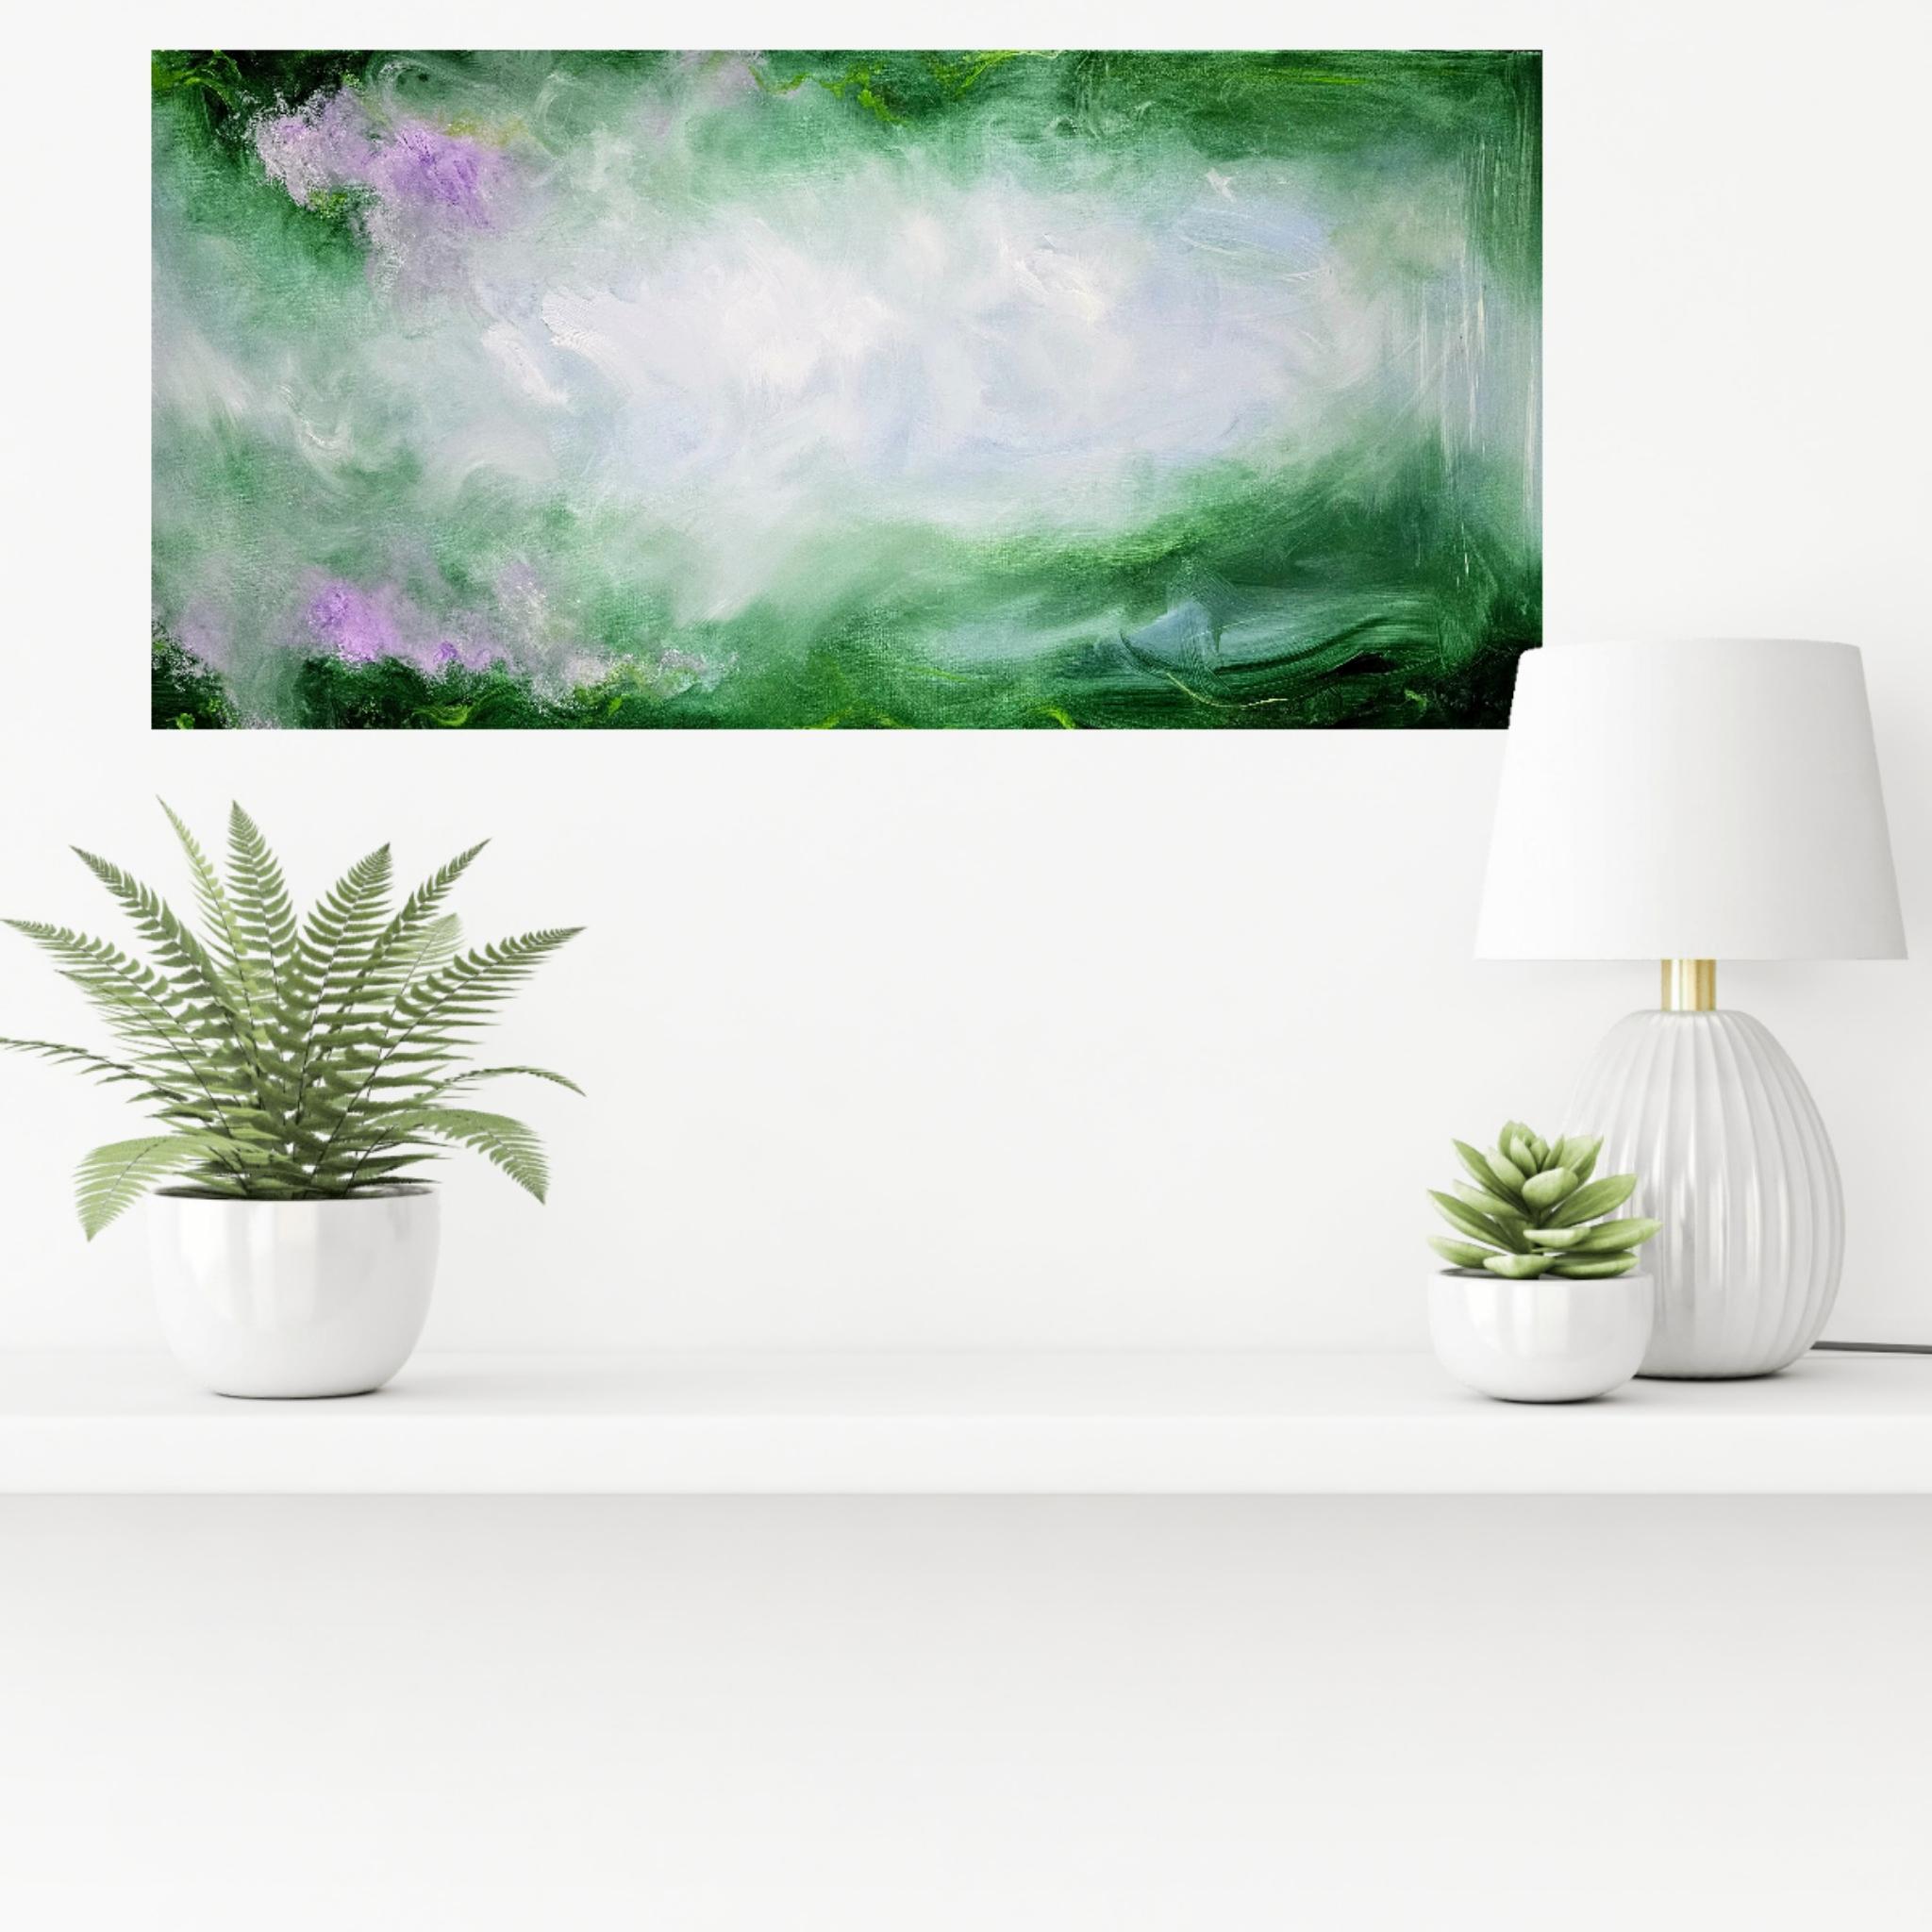 Summer solstice - Vibrant green abstract nature painting For Sale 7